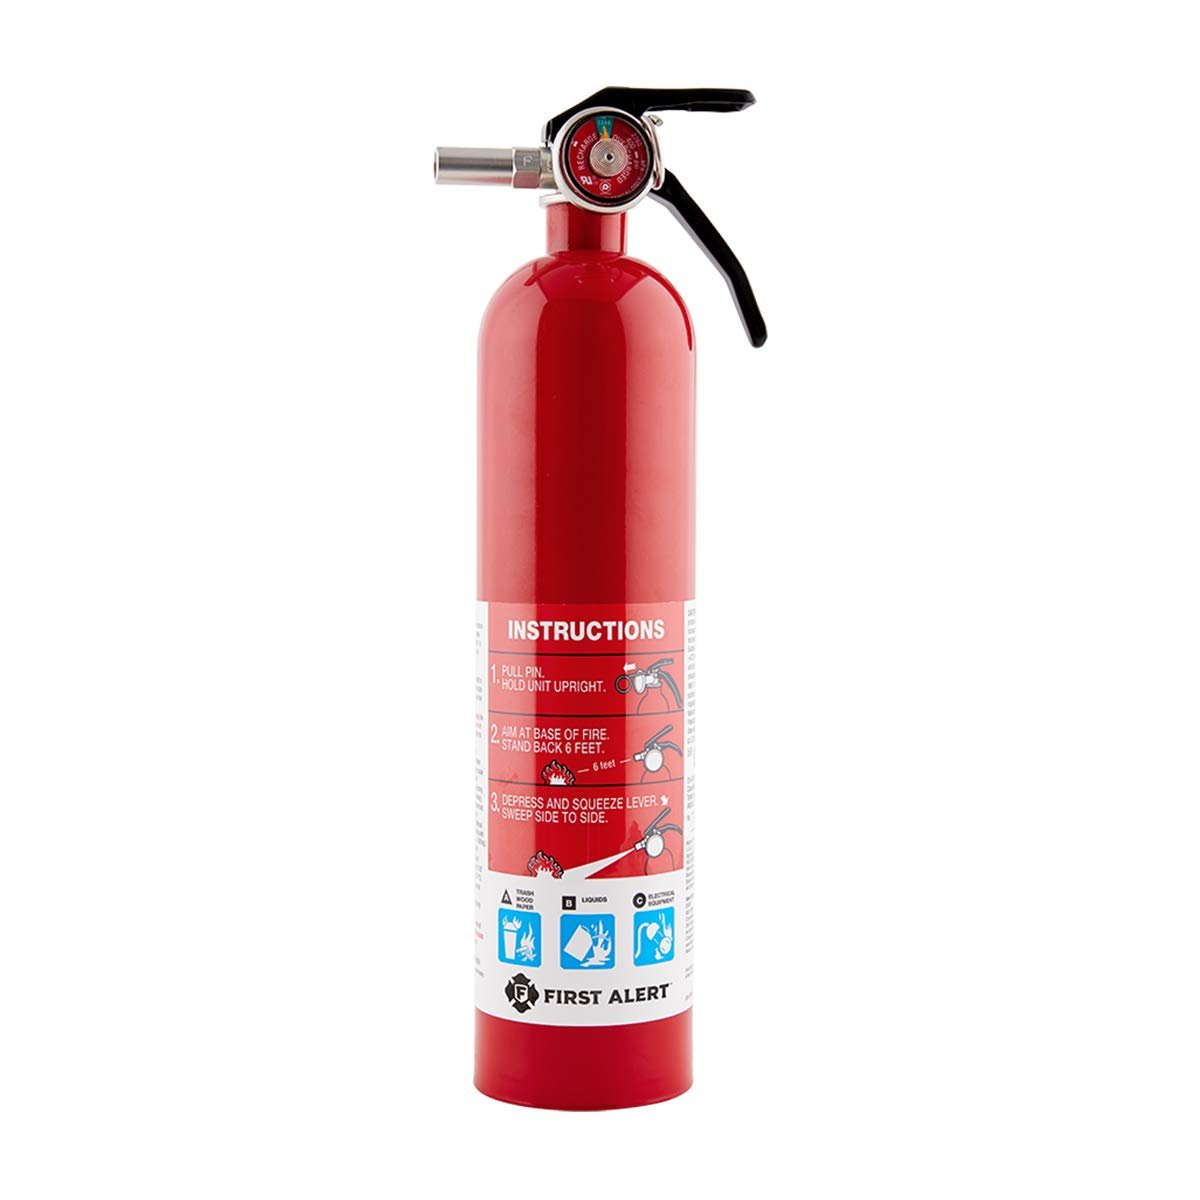 7 Rechargeable Standard Fire Extinguisher - UL Rated 1-A:10-B:C for Home Use.